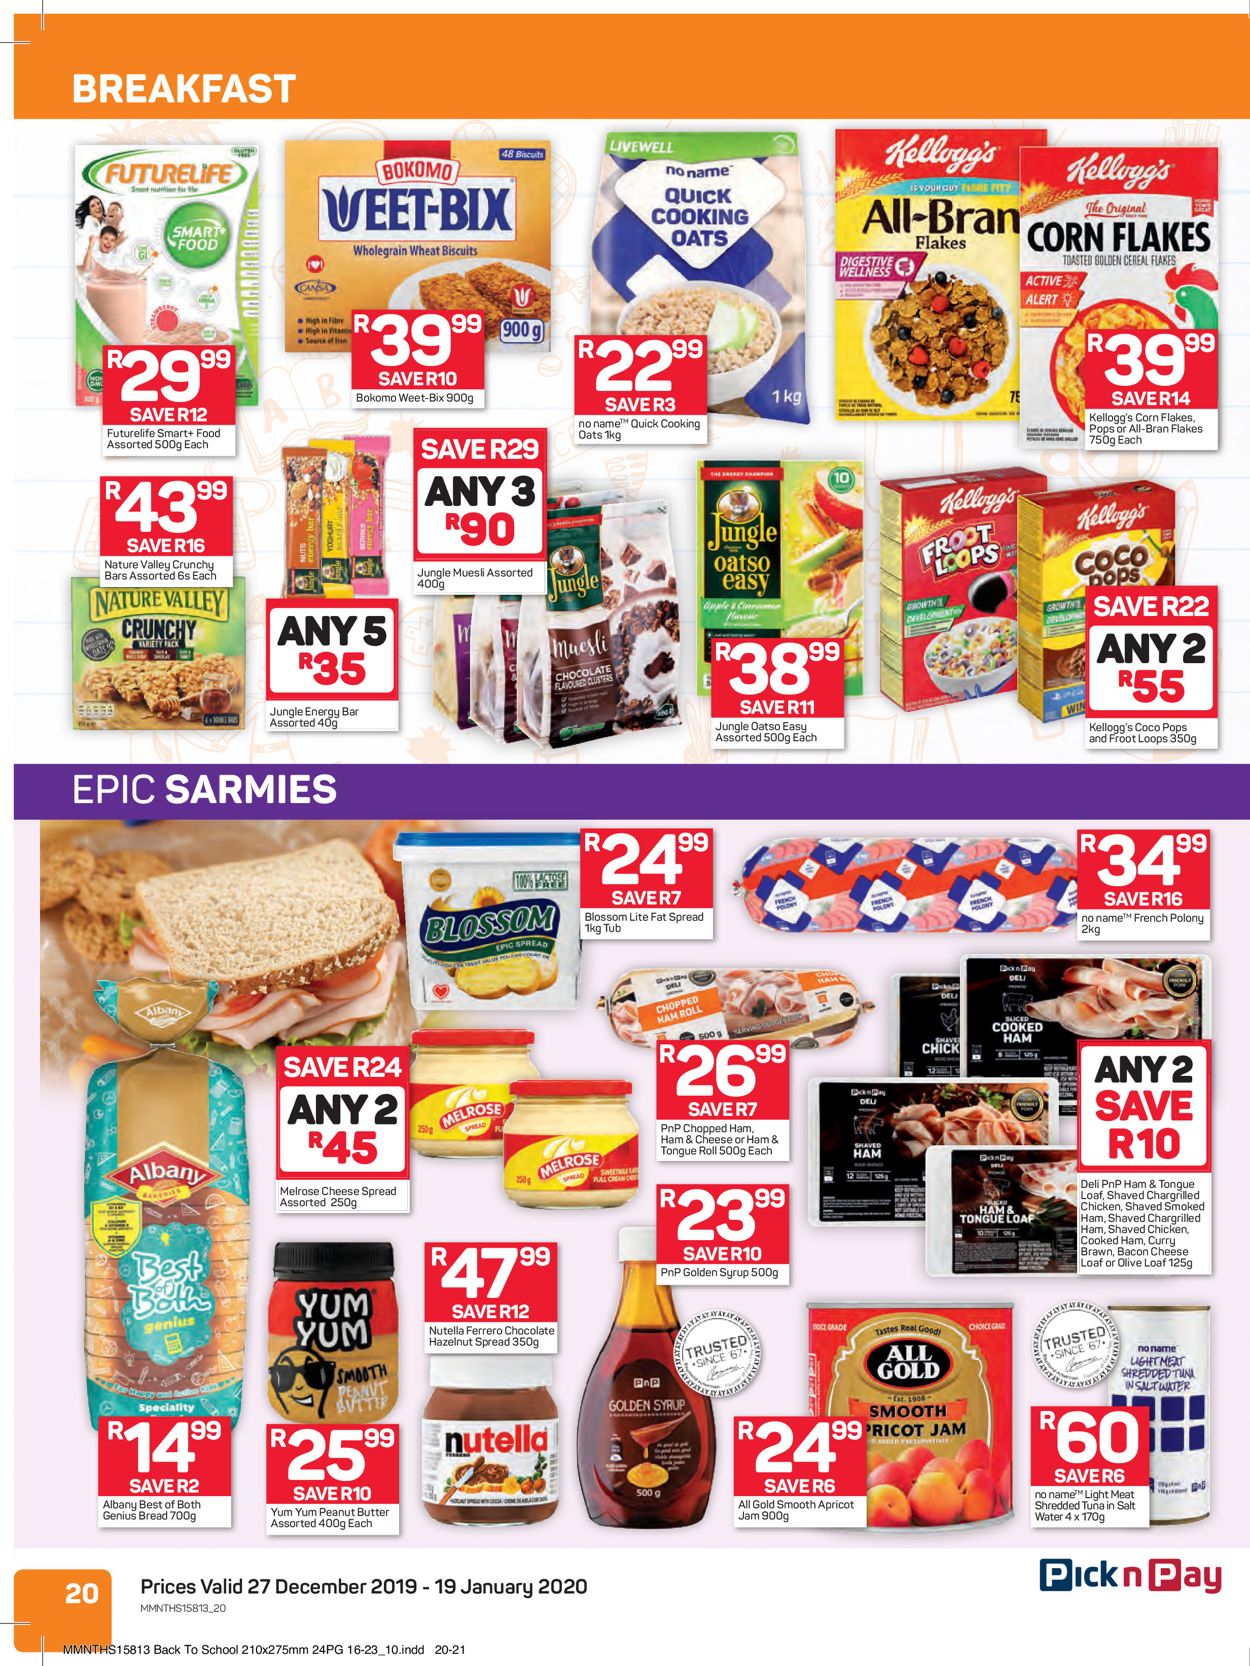 Pick n Pay Back 2 School Catalogue - 2019/12/27-2020/01/19 (Page 21)